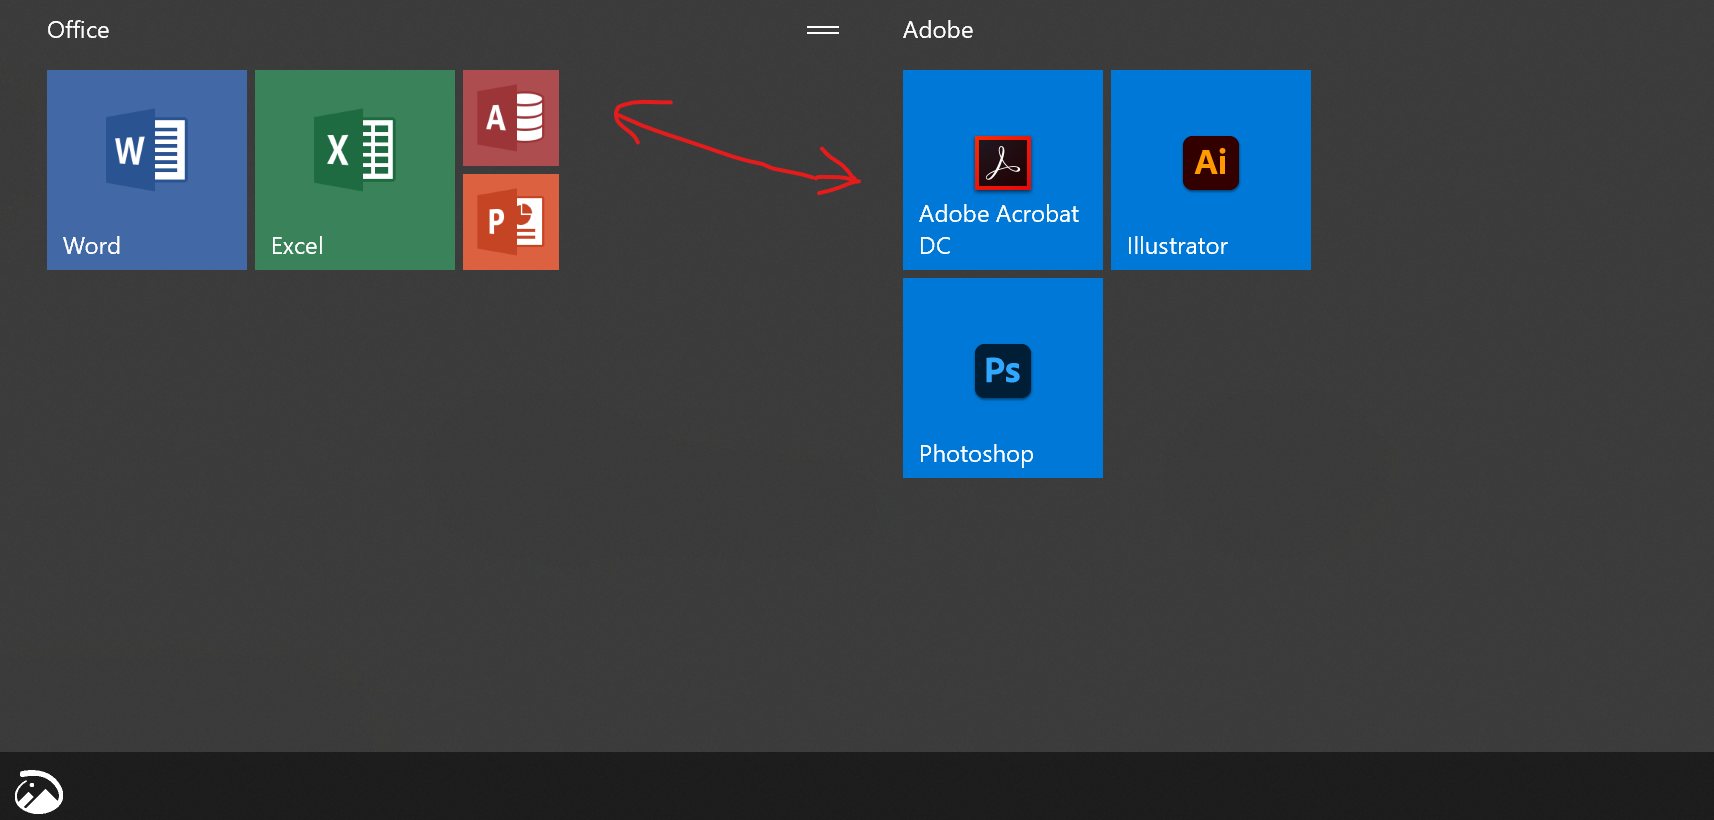 Way too much space between groups in Start Menu f2c374b5-18ad-46ef-b7a1-79c9defb43d9?upload=true.png